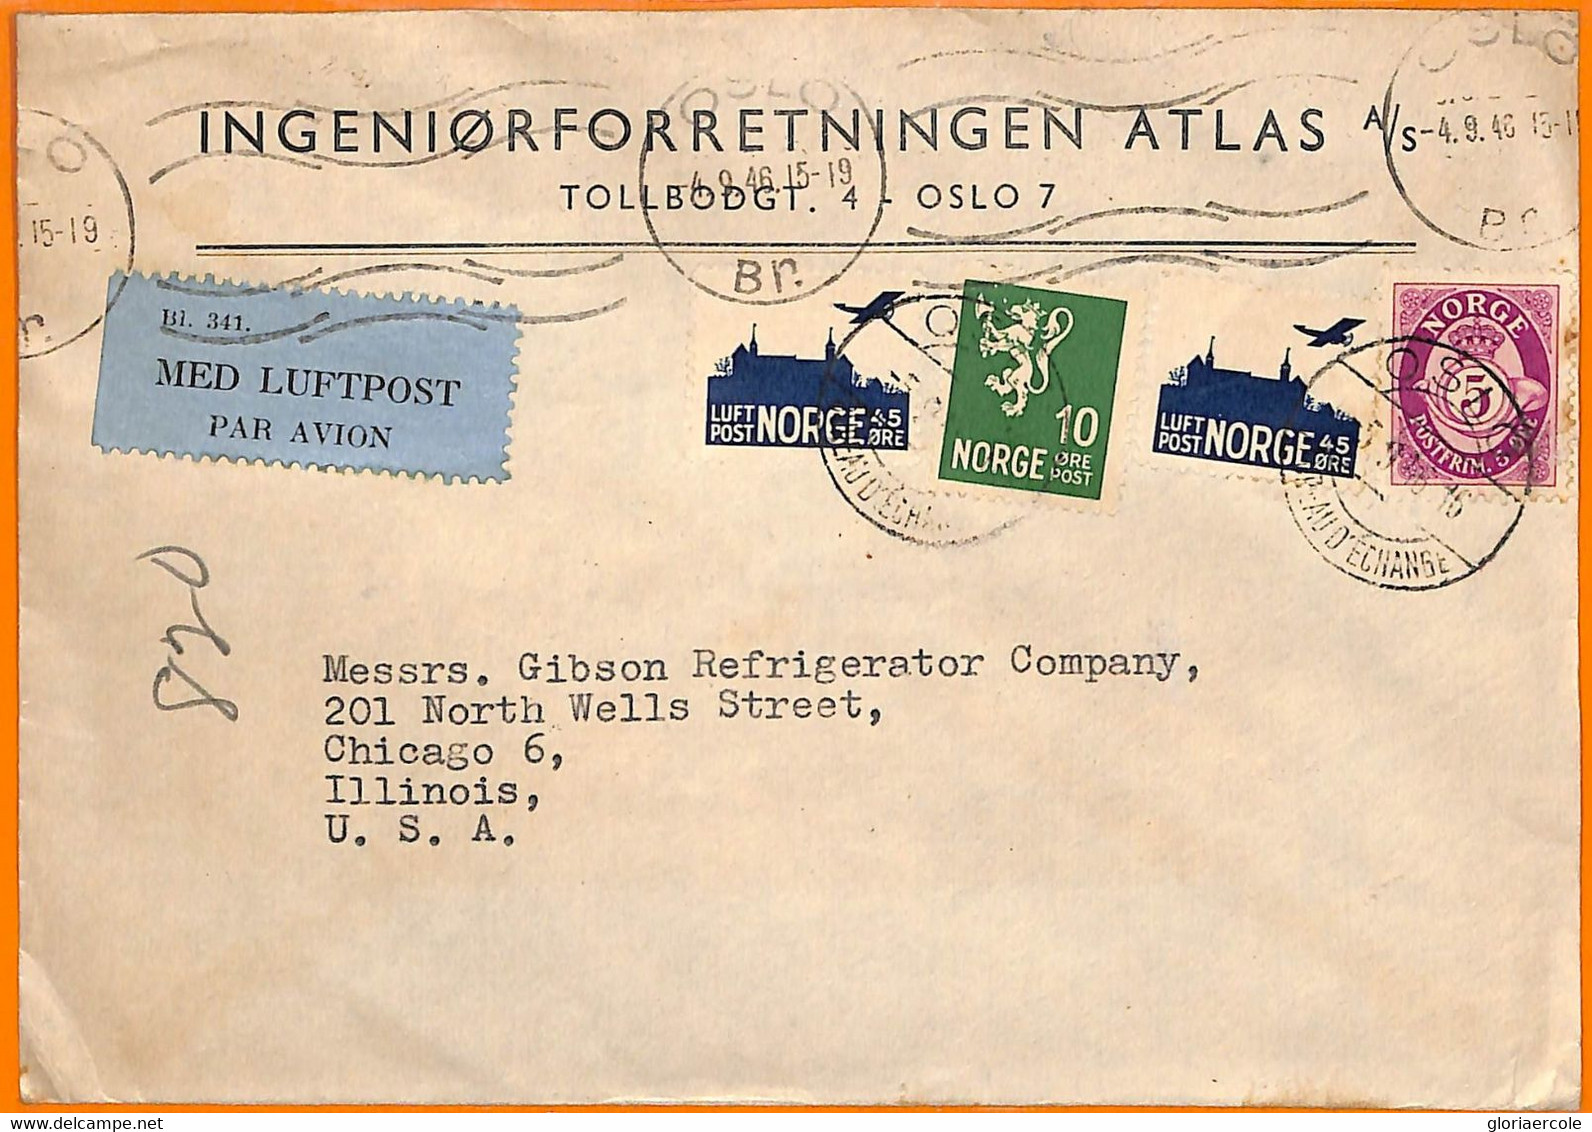 99411 - NORWAY - Postal History - Airmail Cover To The USA 1946 - Covers & Documents